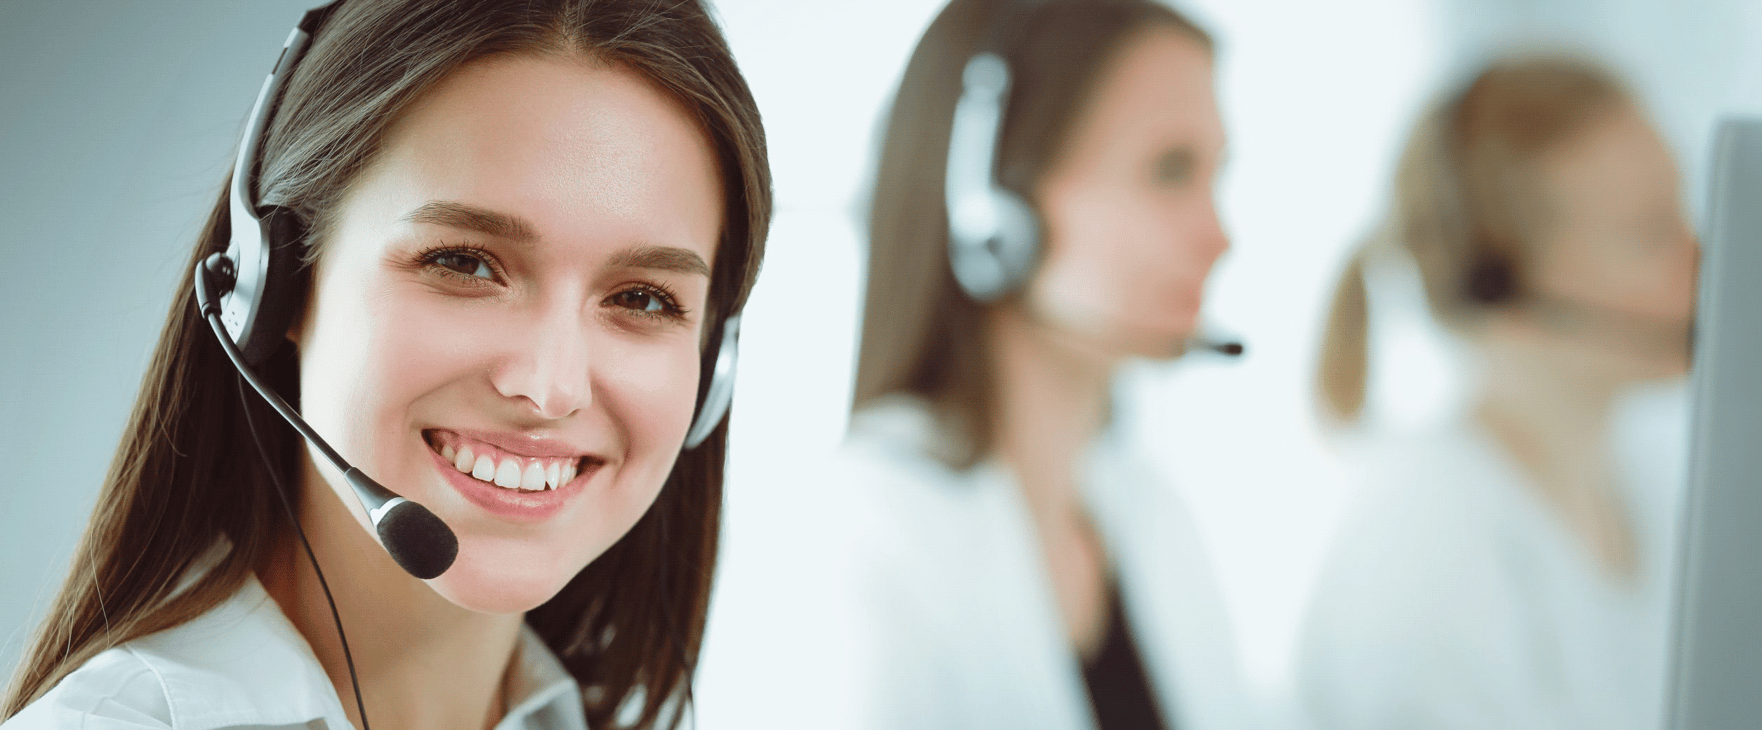 How Hospital Contact Centers Help